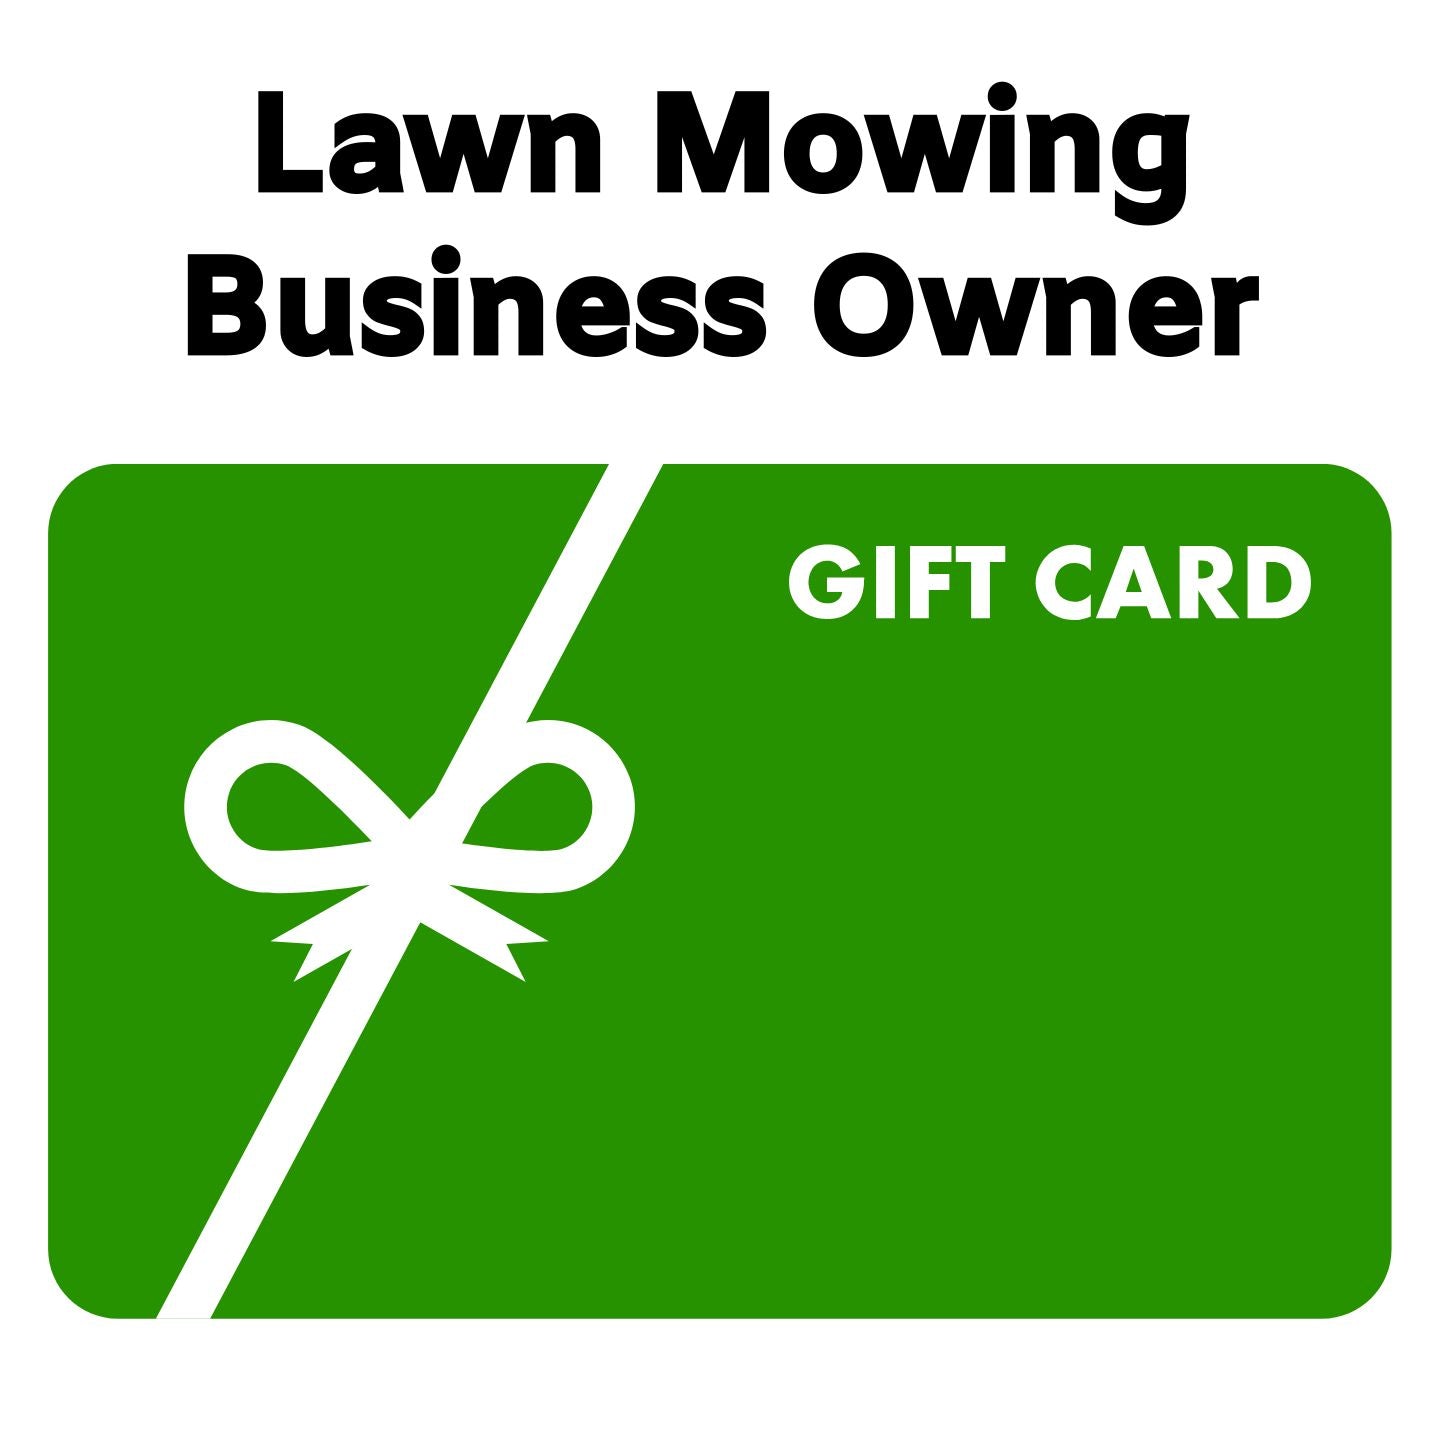 Lawn Mowing Business Owner Gift Card